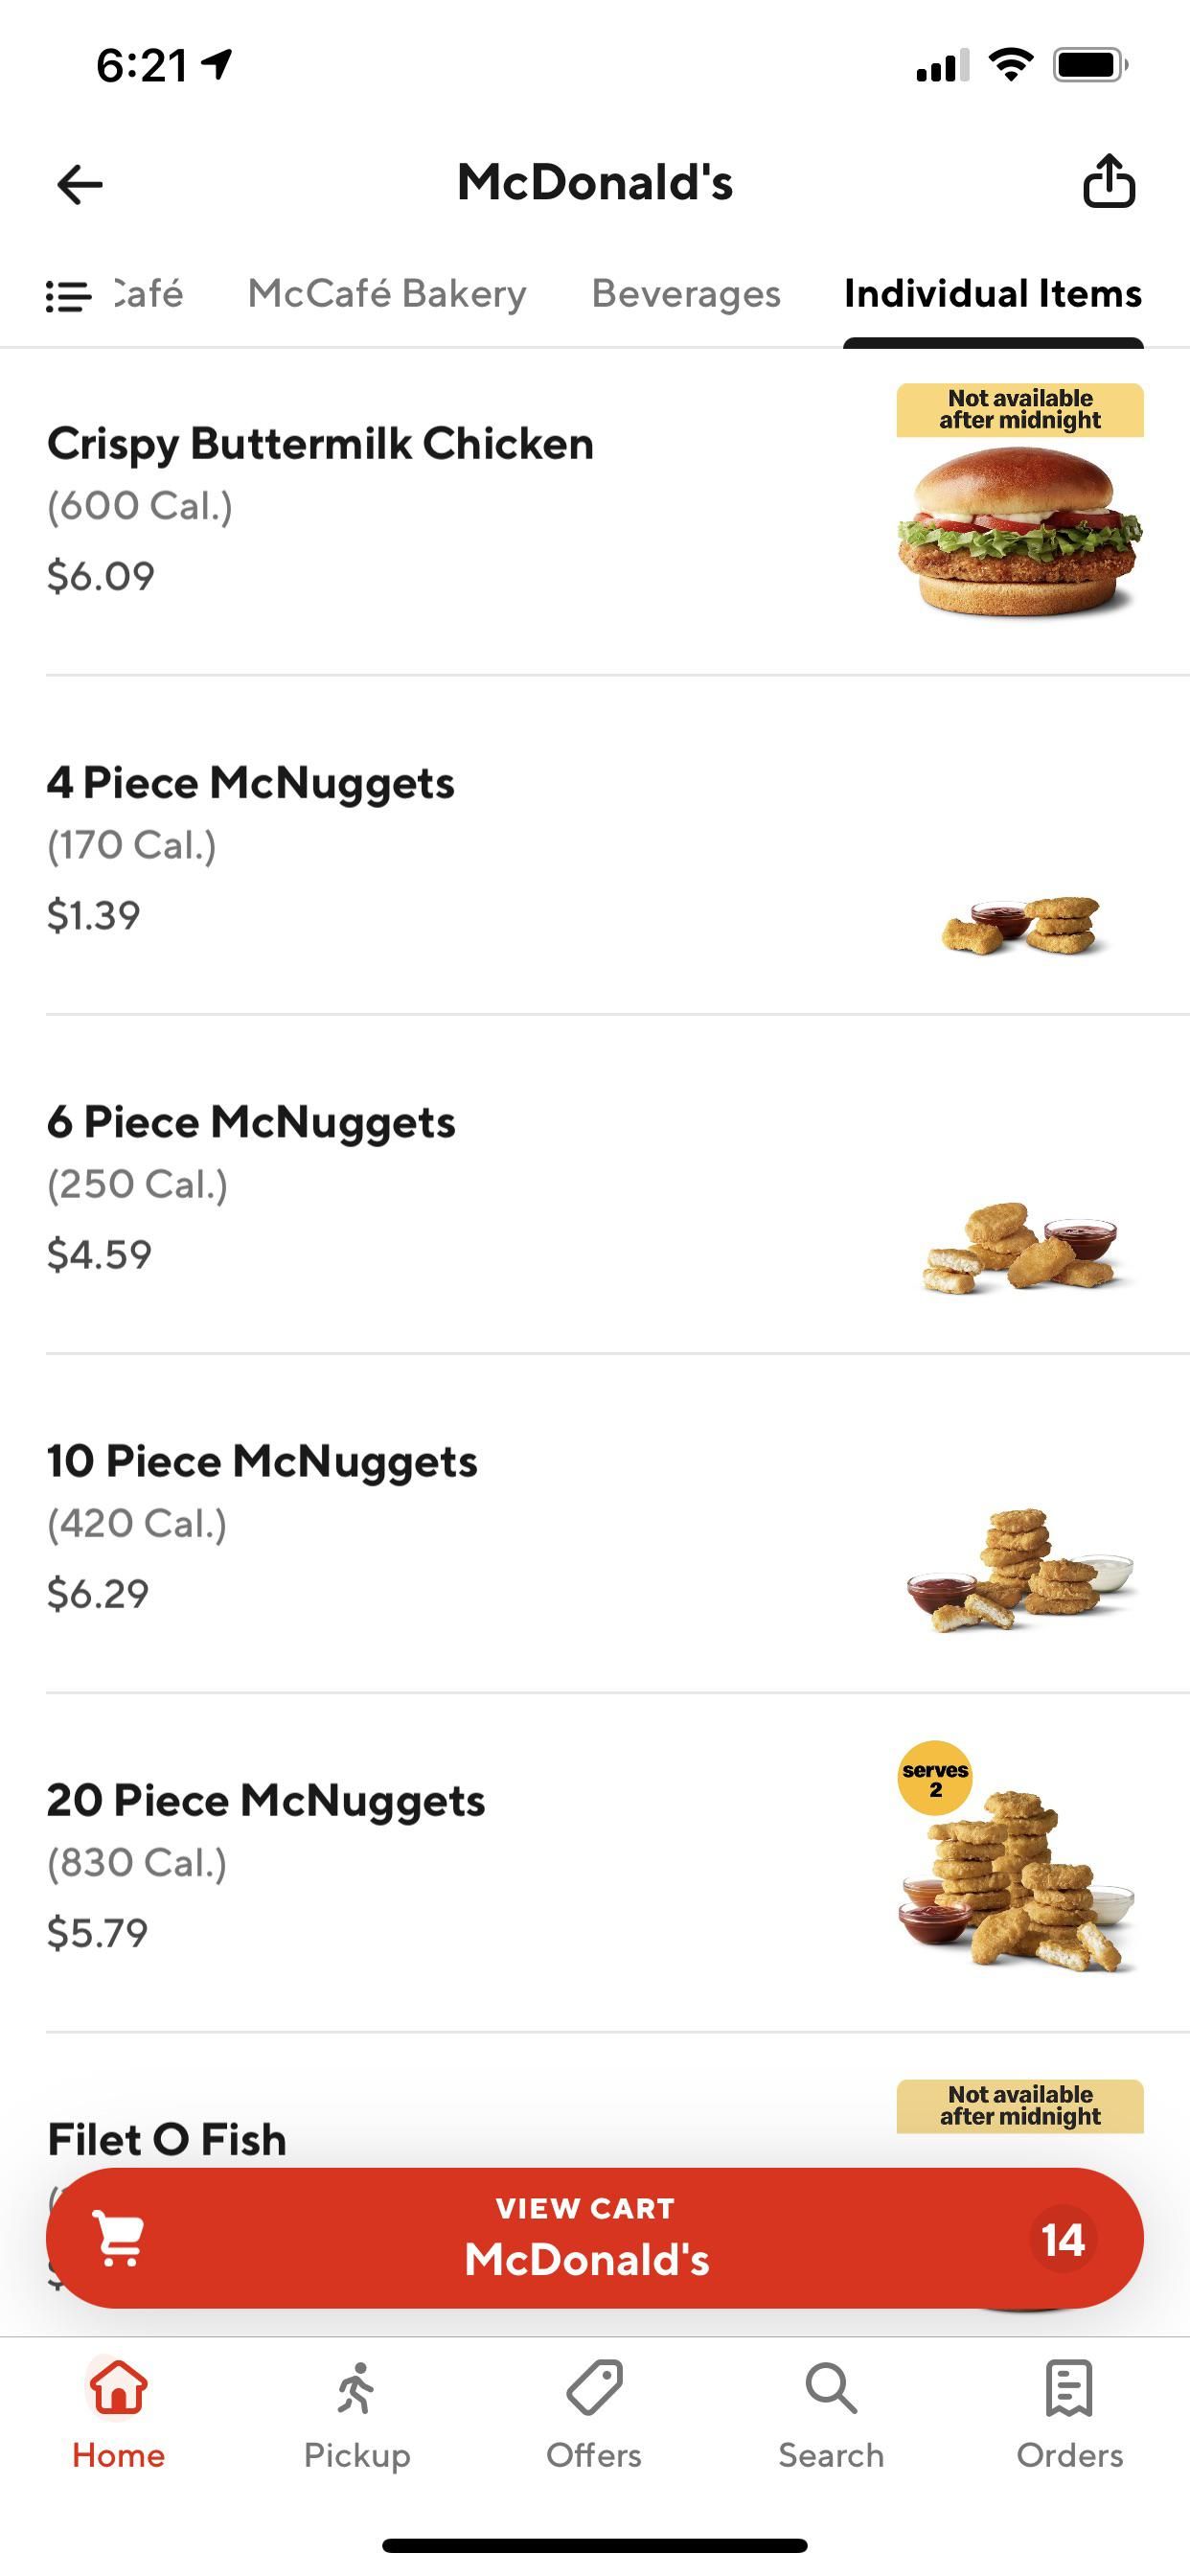 The world’s greatest economists cannot understand McNugget pricing